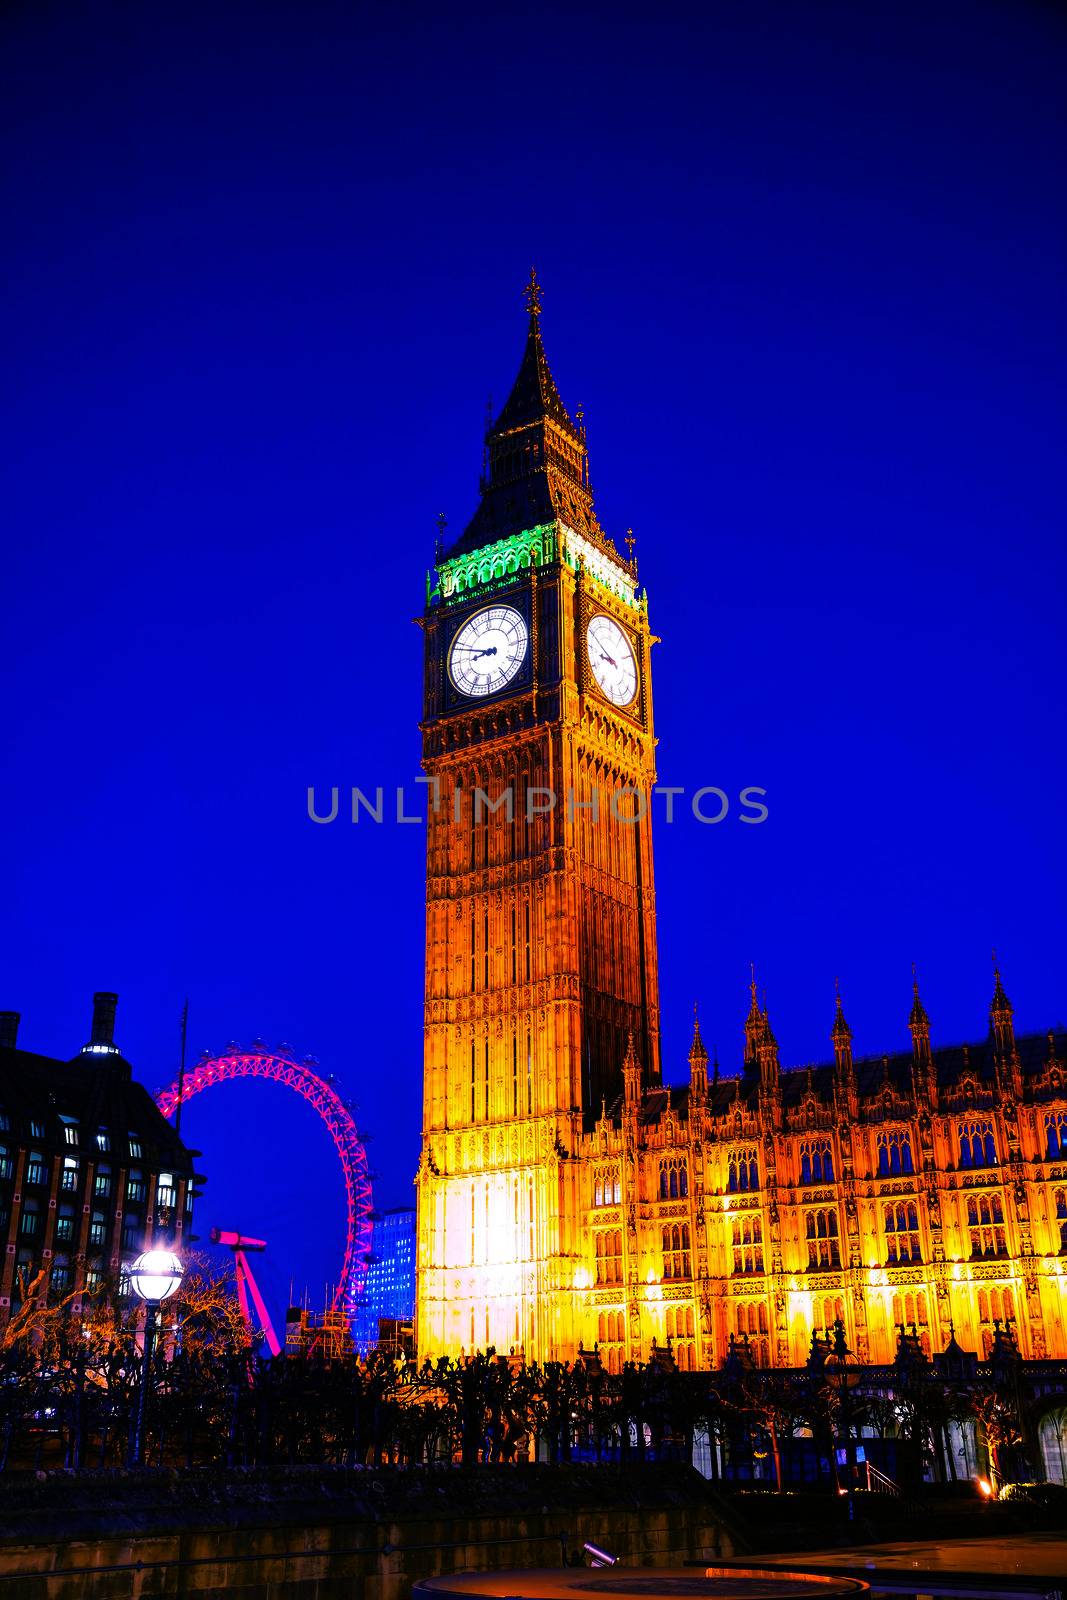 Clock tower in London by AndreyKr